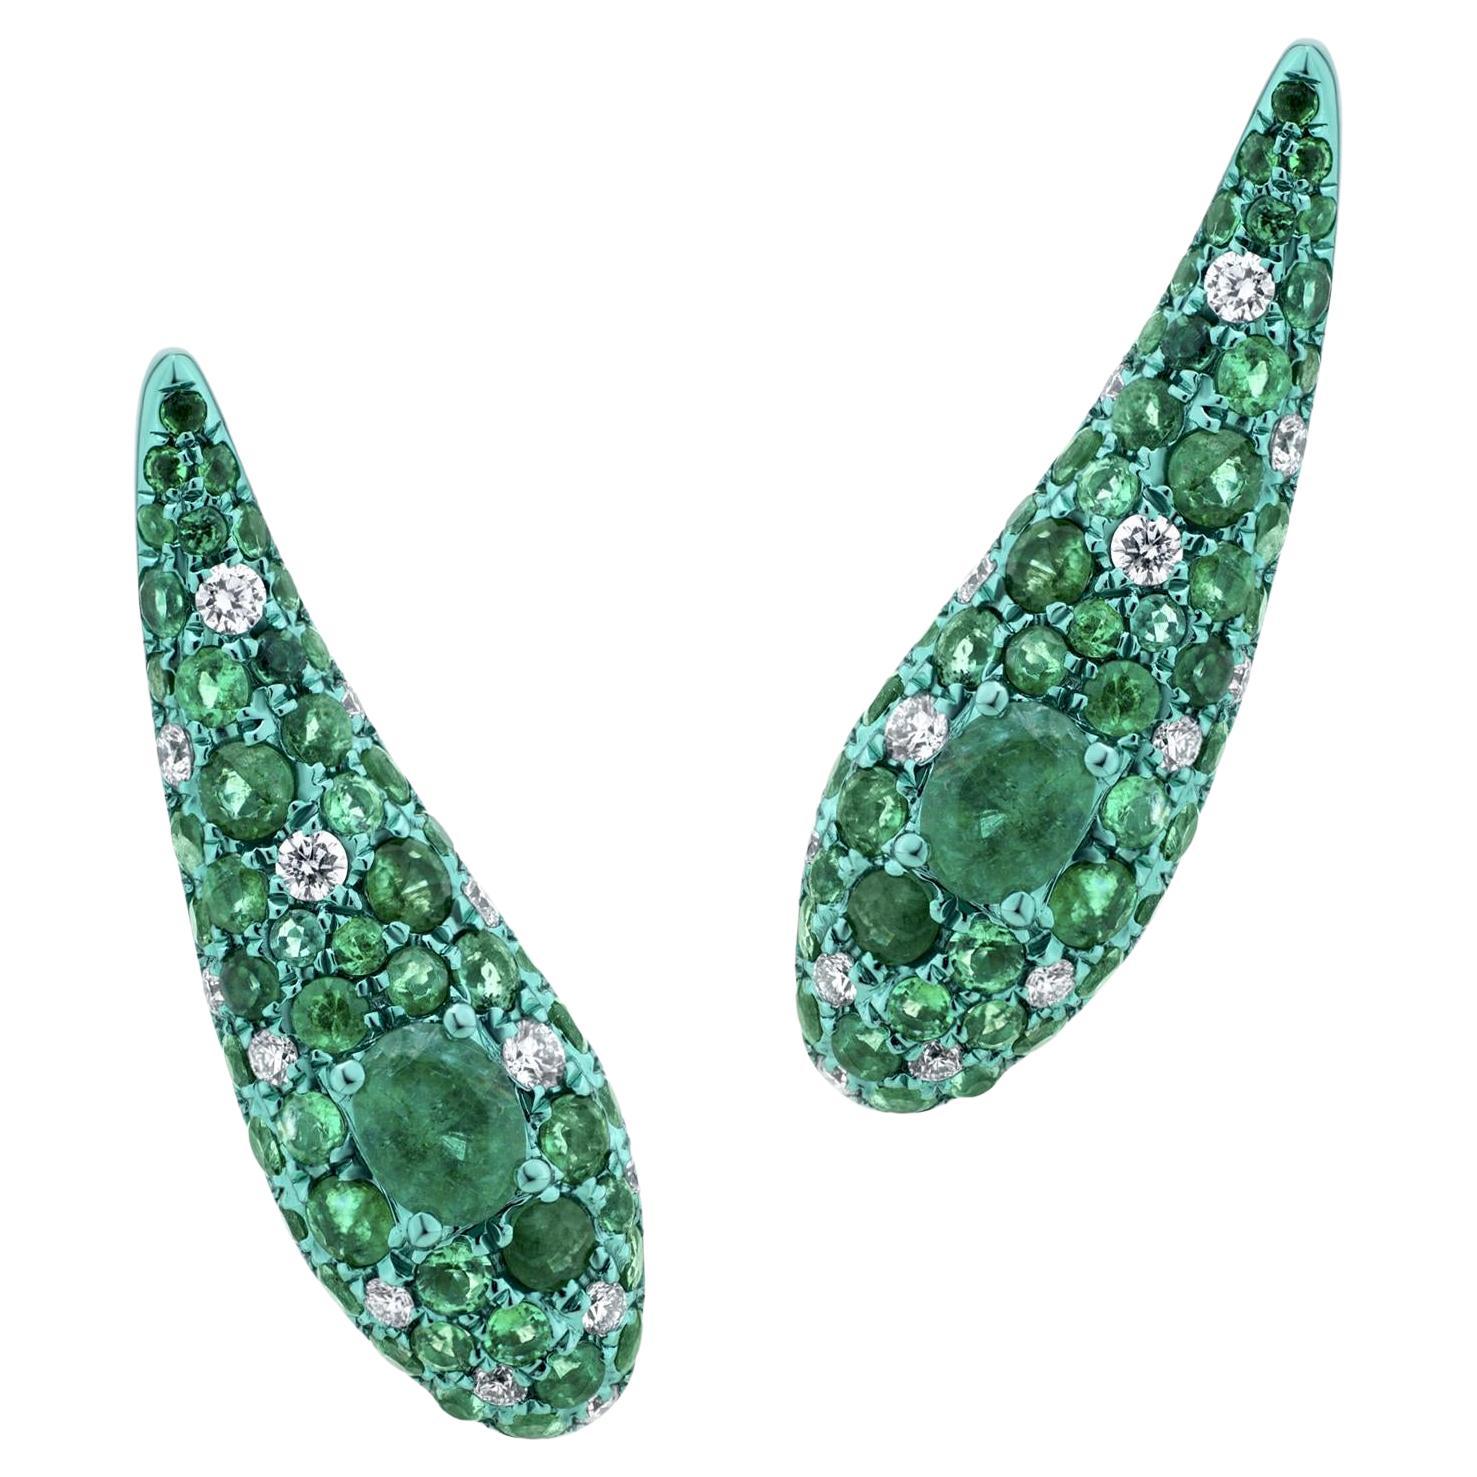 Gemistry 1.69Cttw. Emerald and Diamond Serpentine Ear Climber in 18k Gold